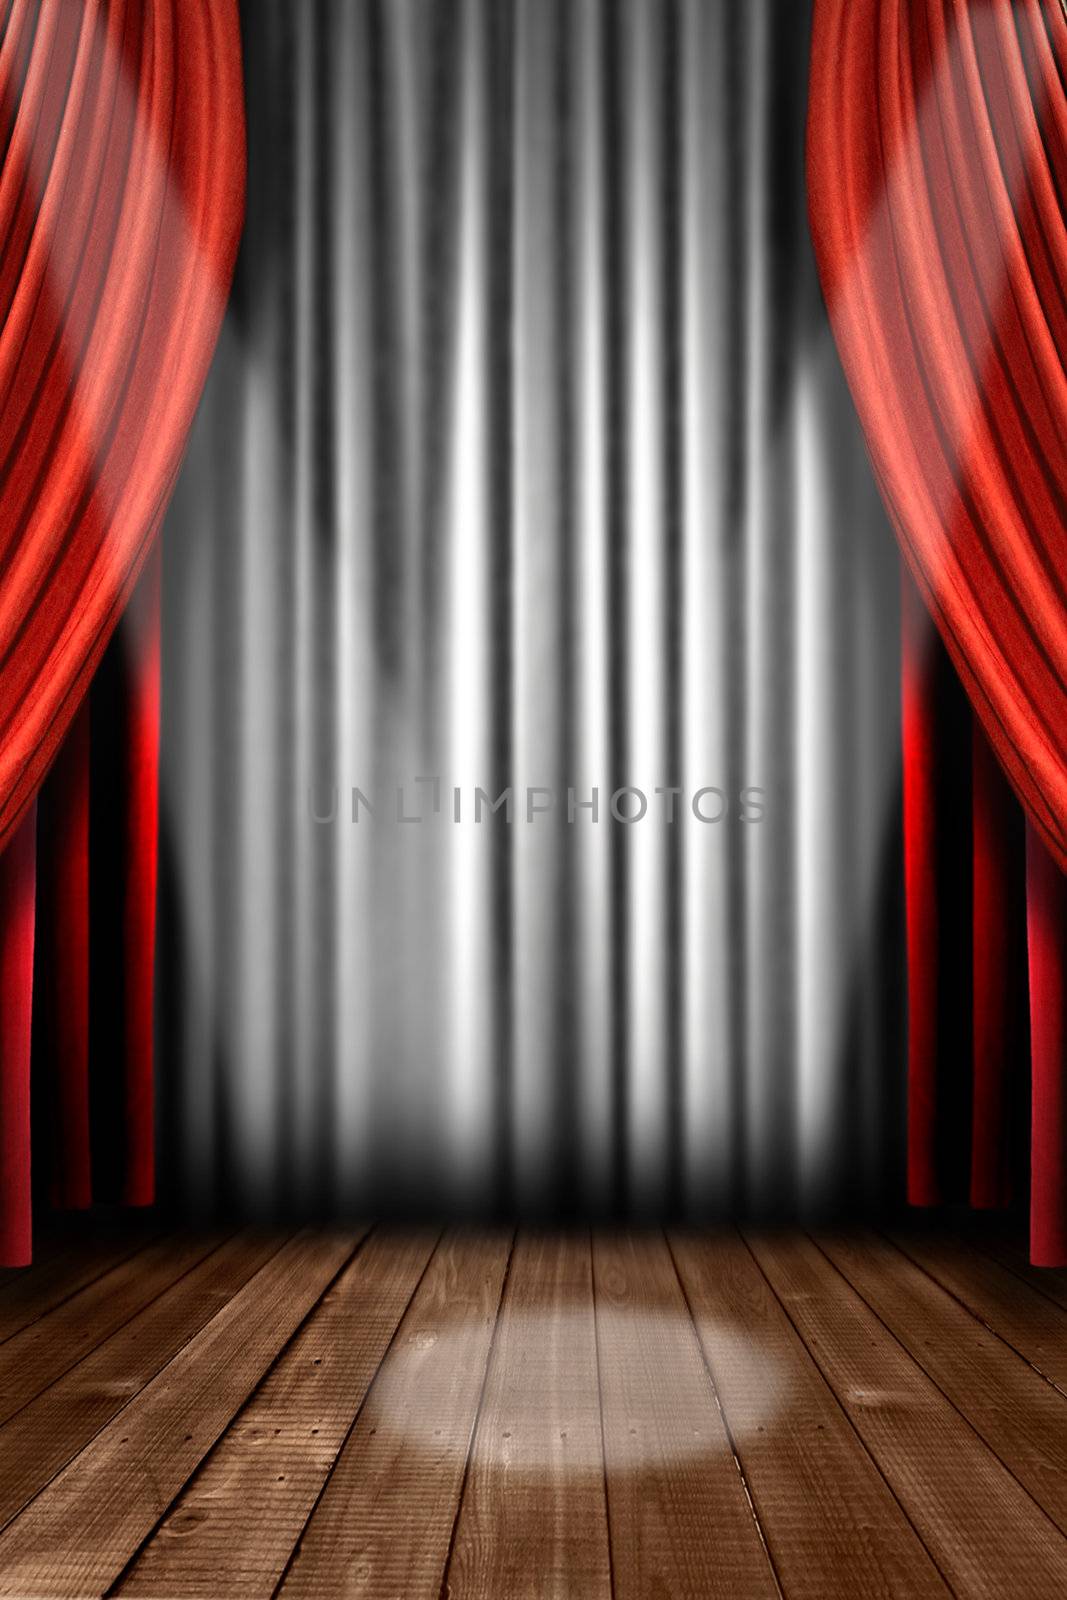 Vertical Stage Drapes With Spot Light by tobkatrina